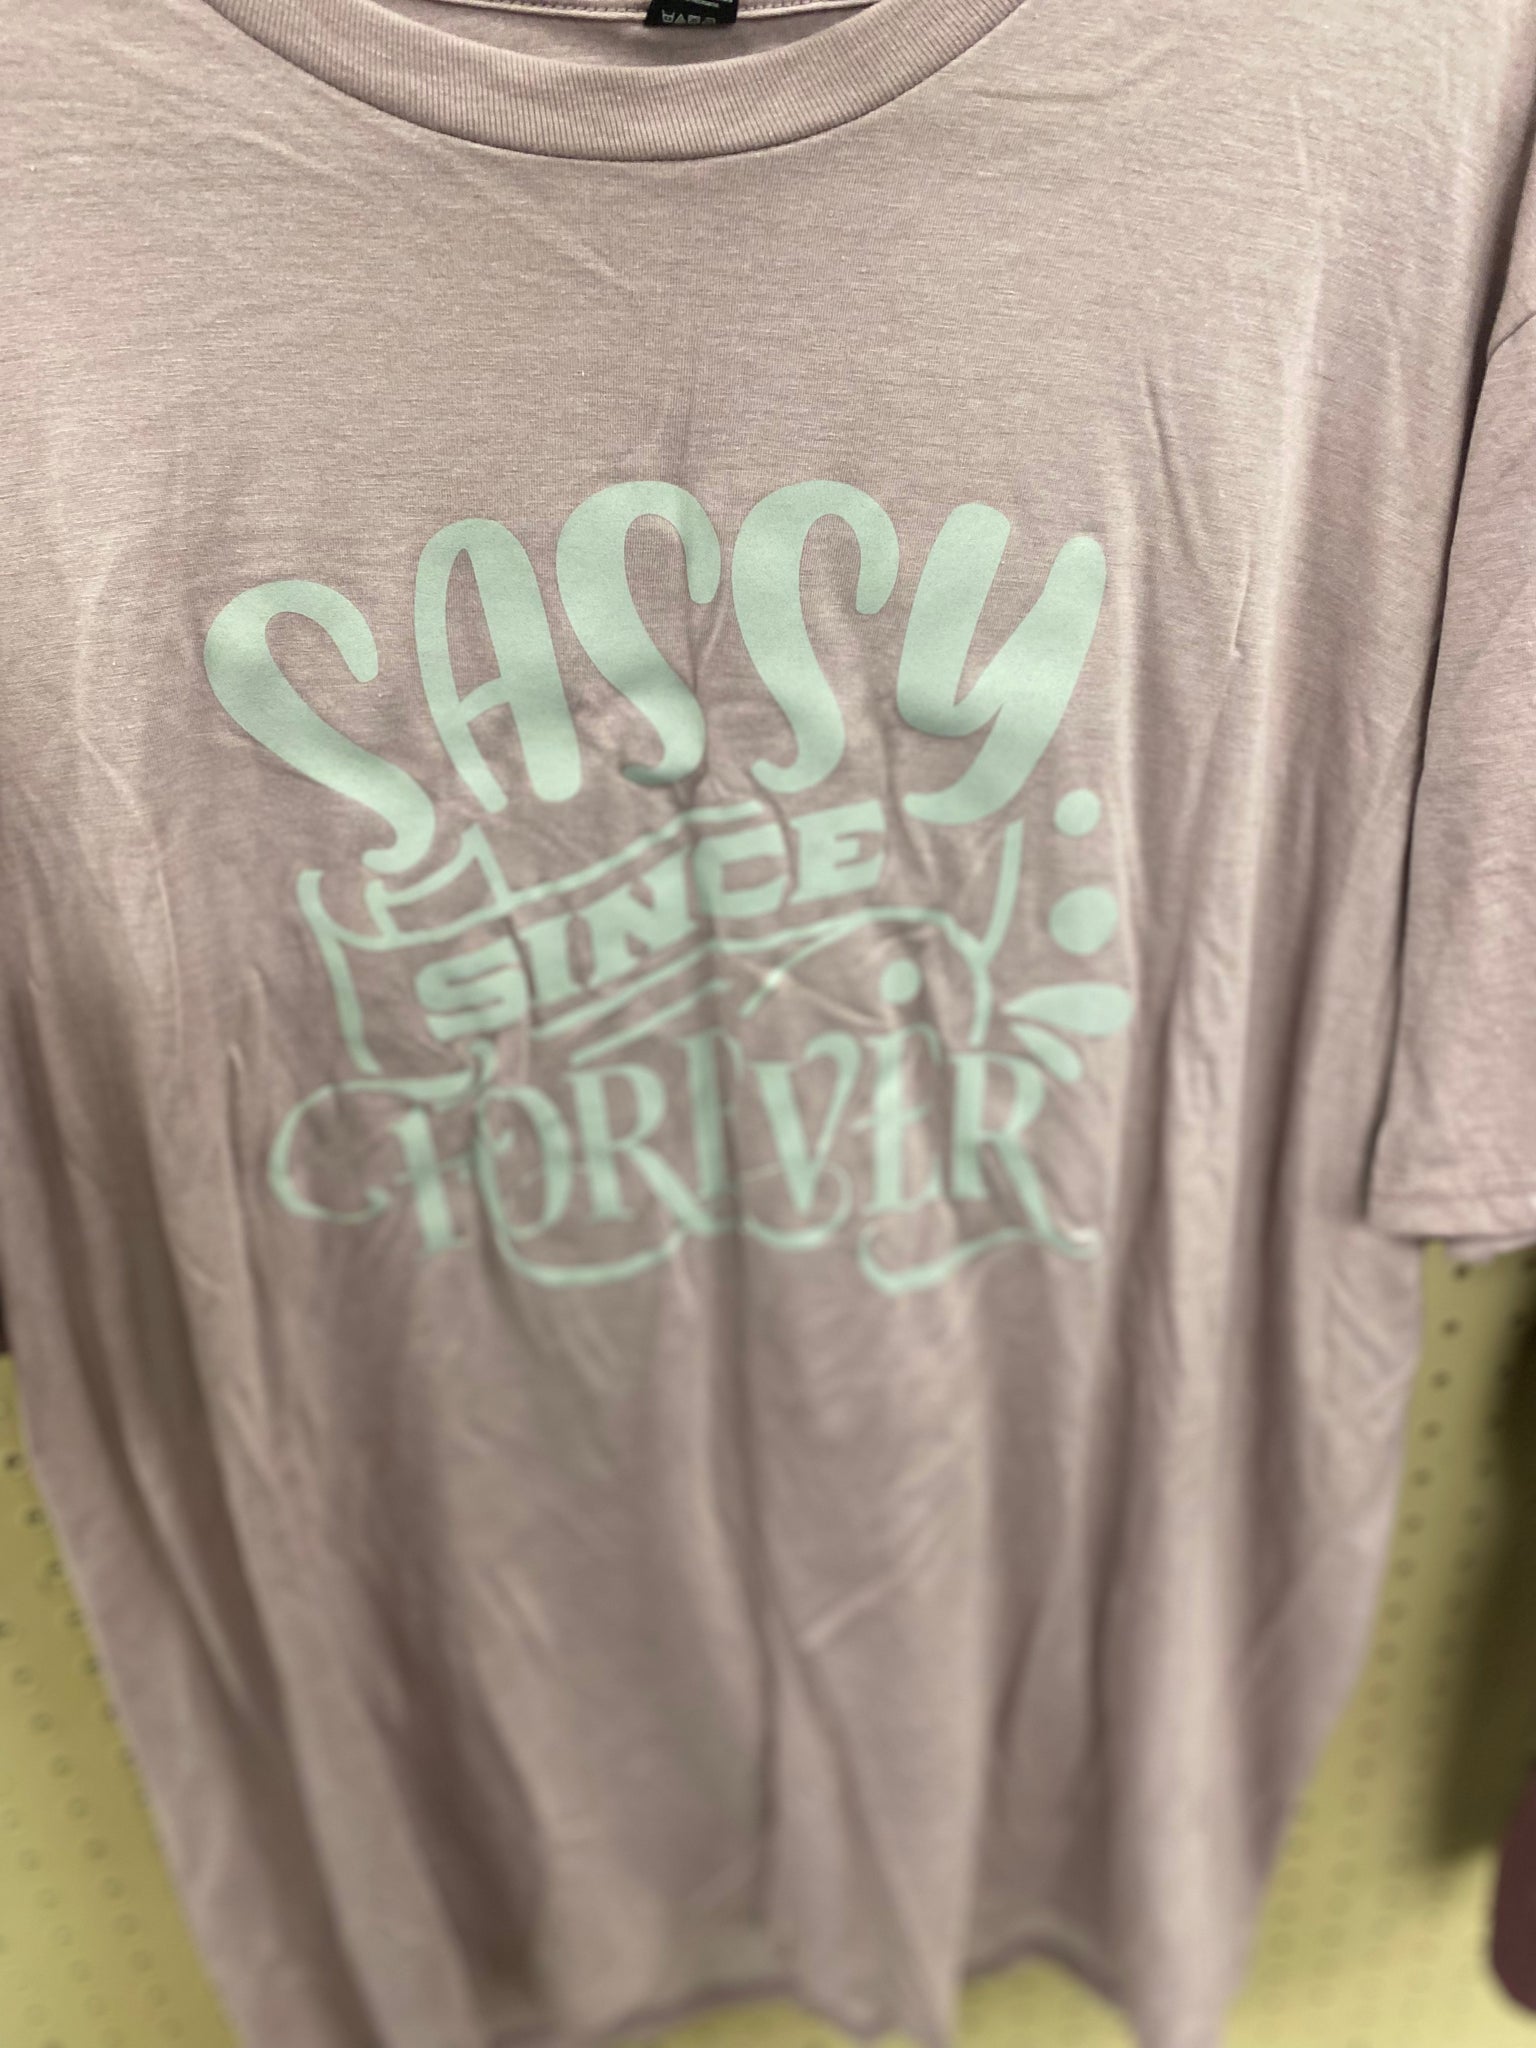 Sassy since forever tee 2x